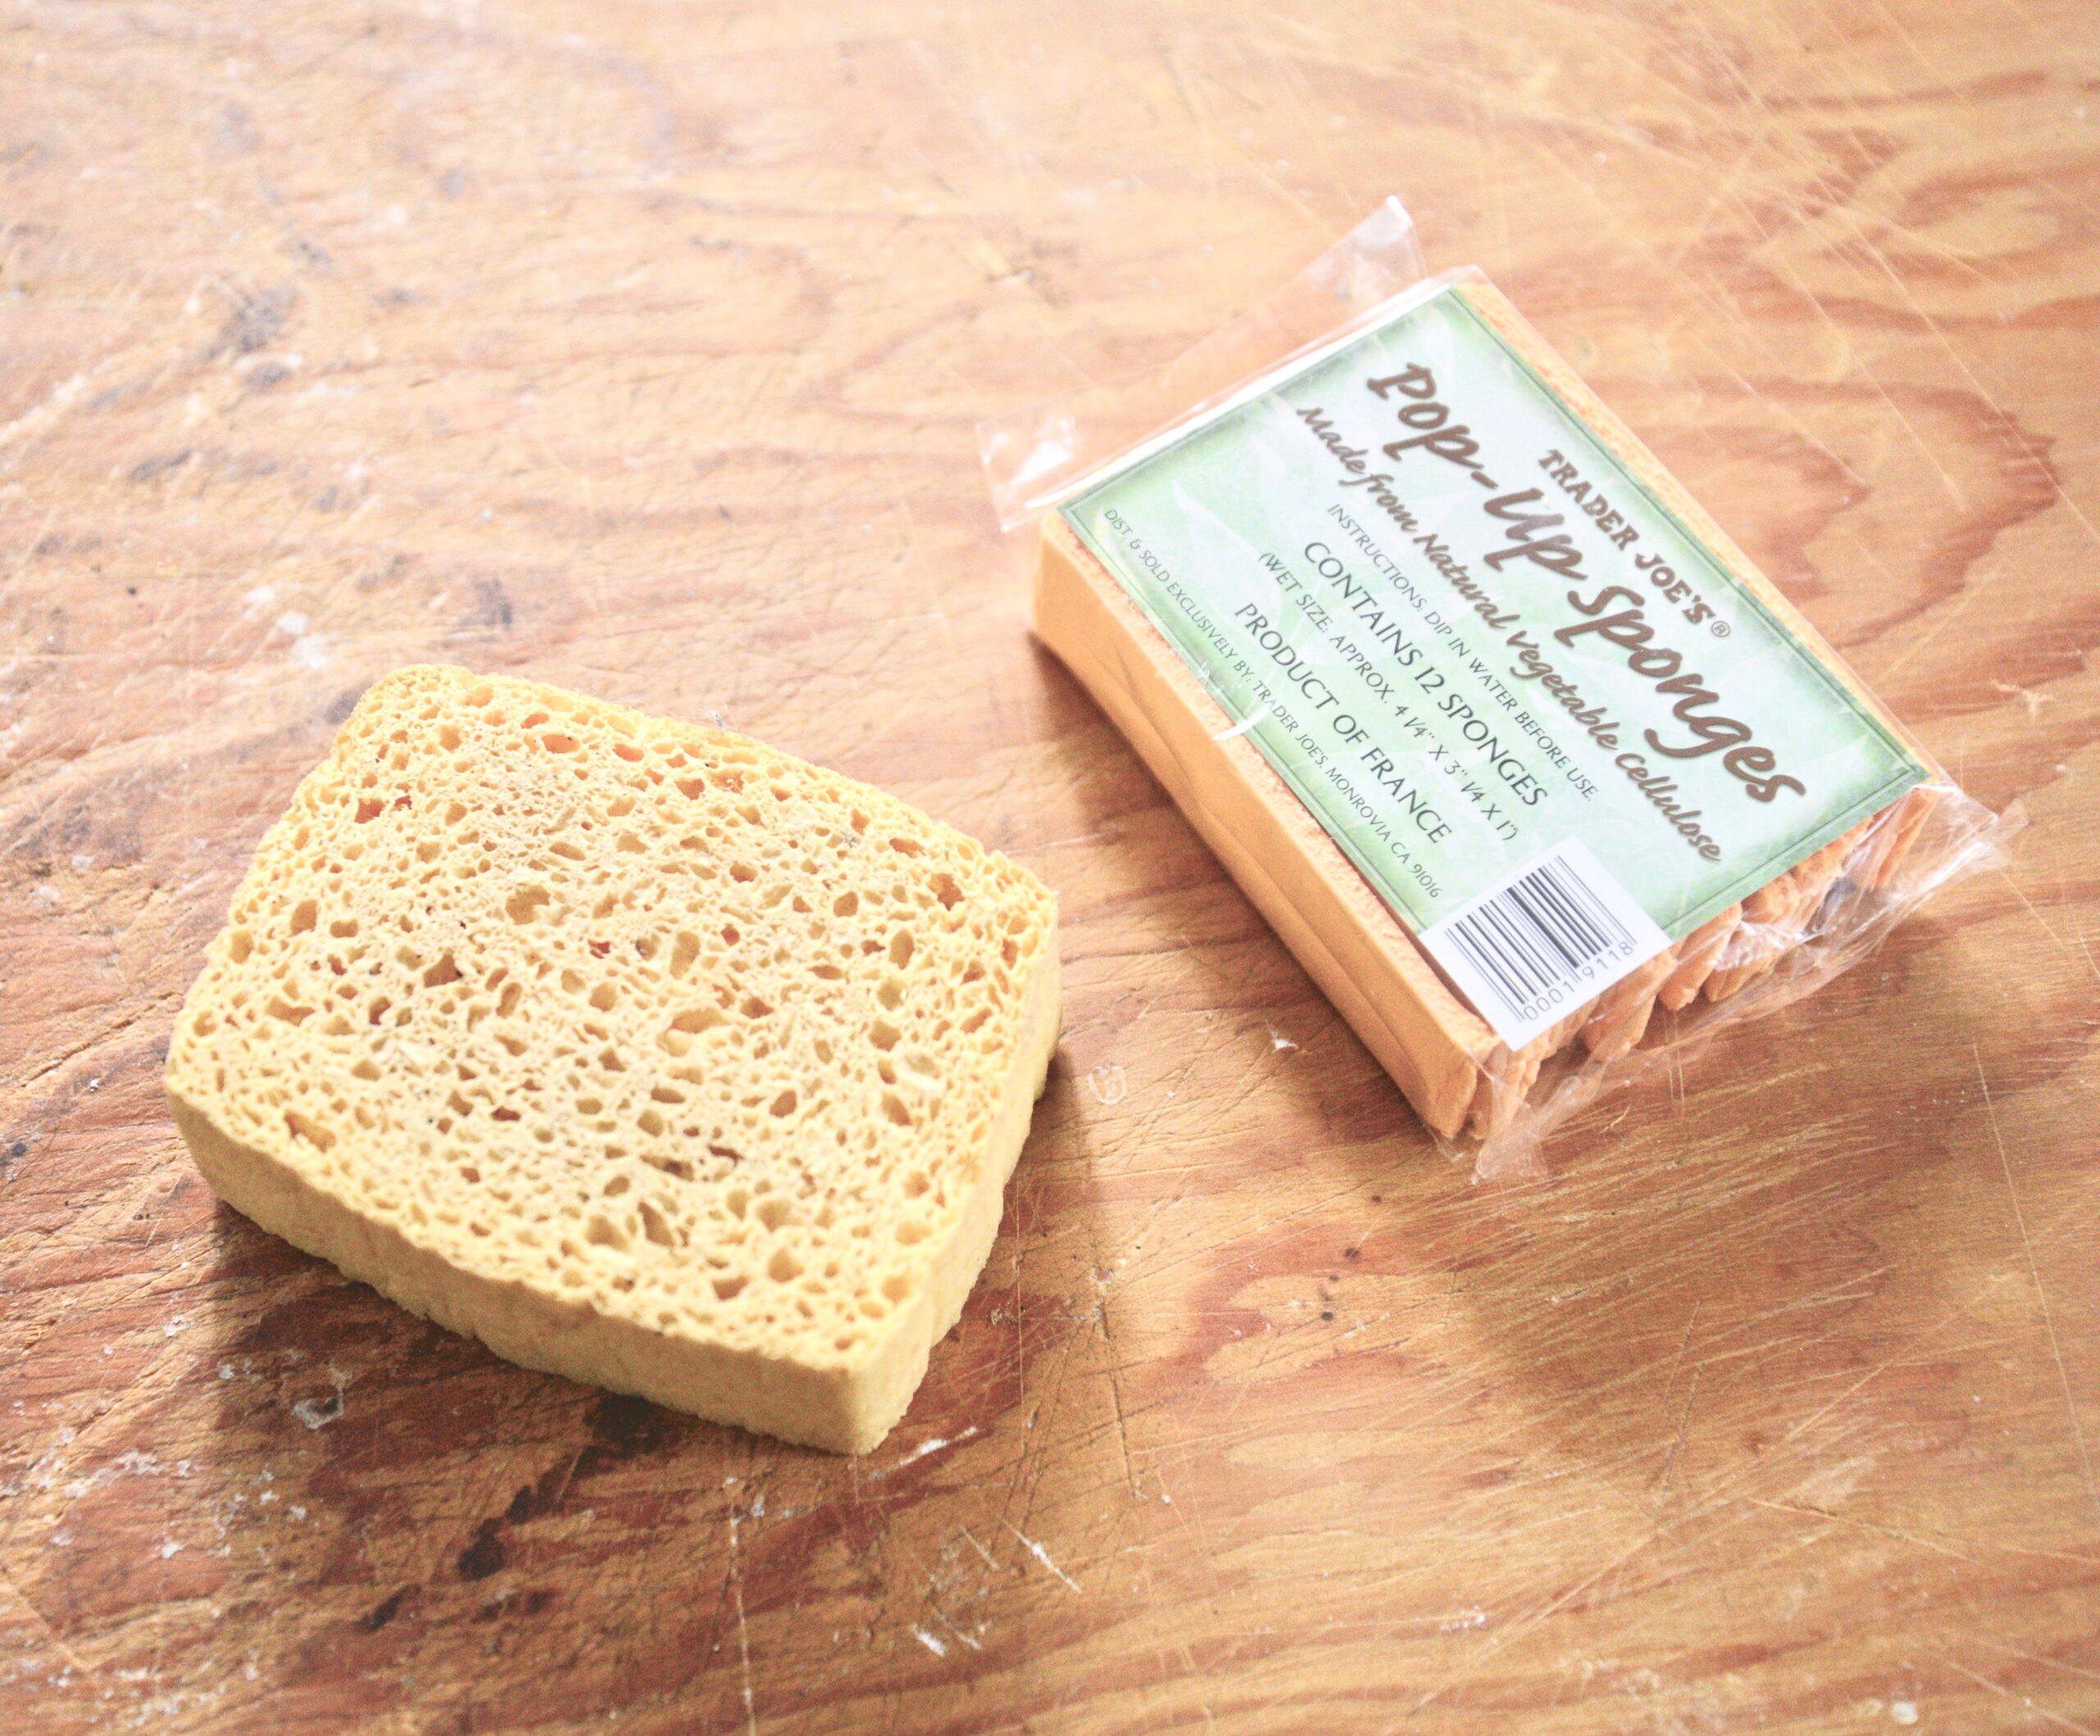 cellulose sponge next to a package of Trader Joe's pop-up sponges